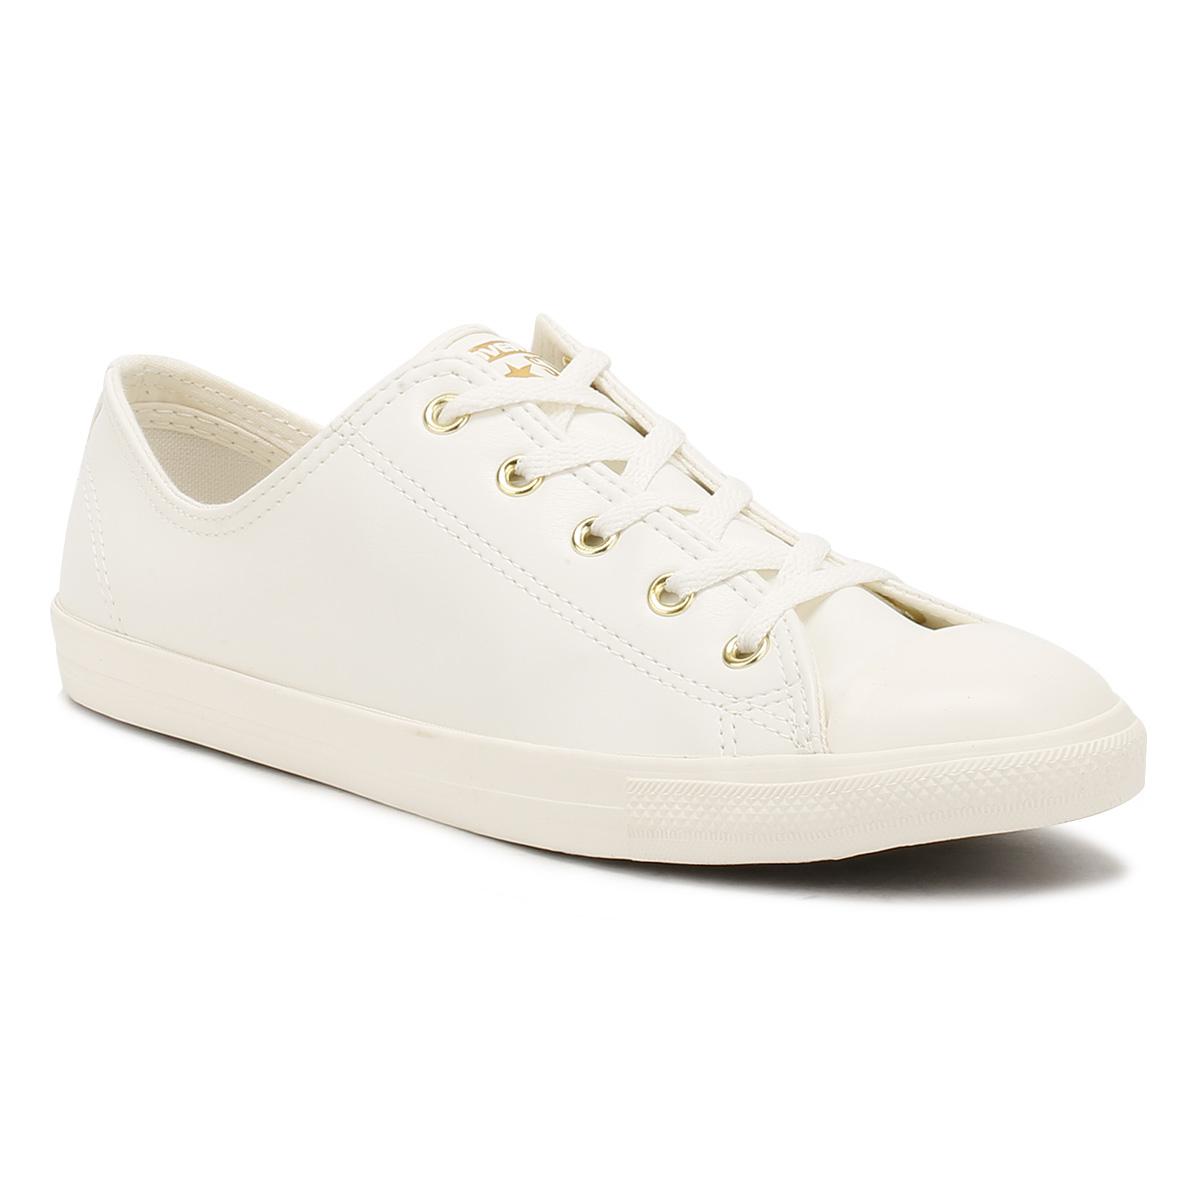 converse chuck taylor ox dainty womens casual shoes